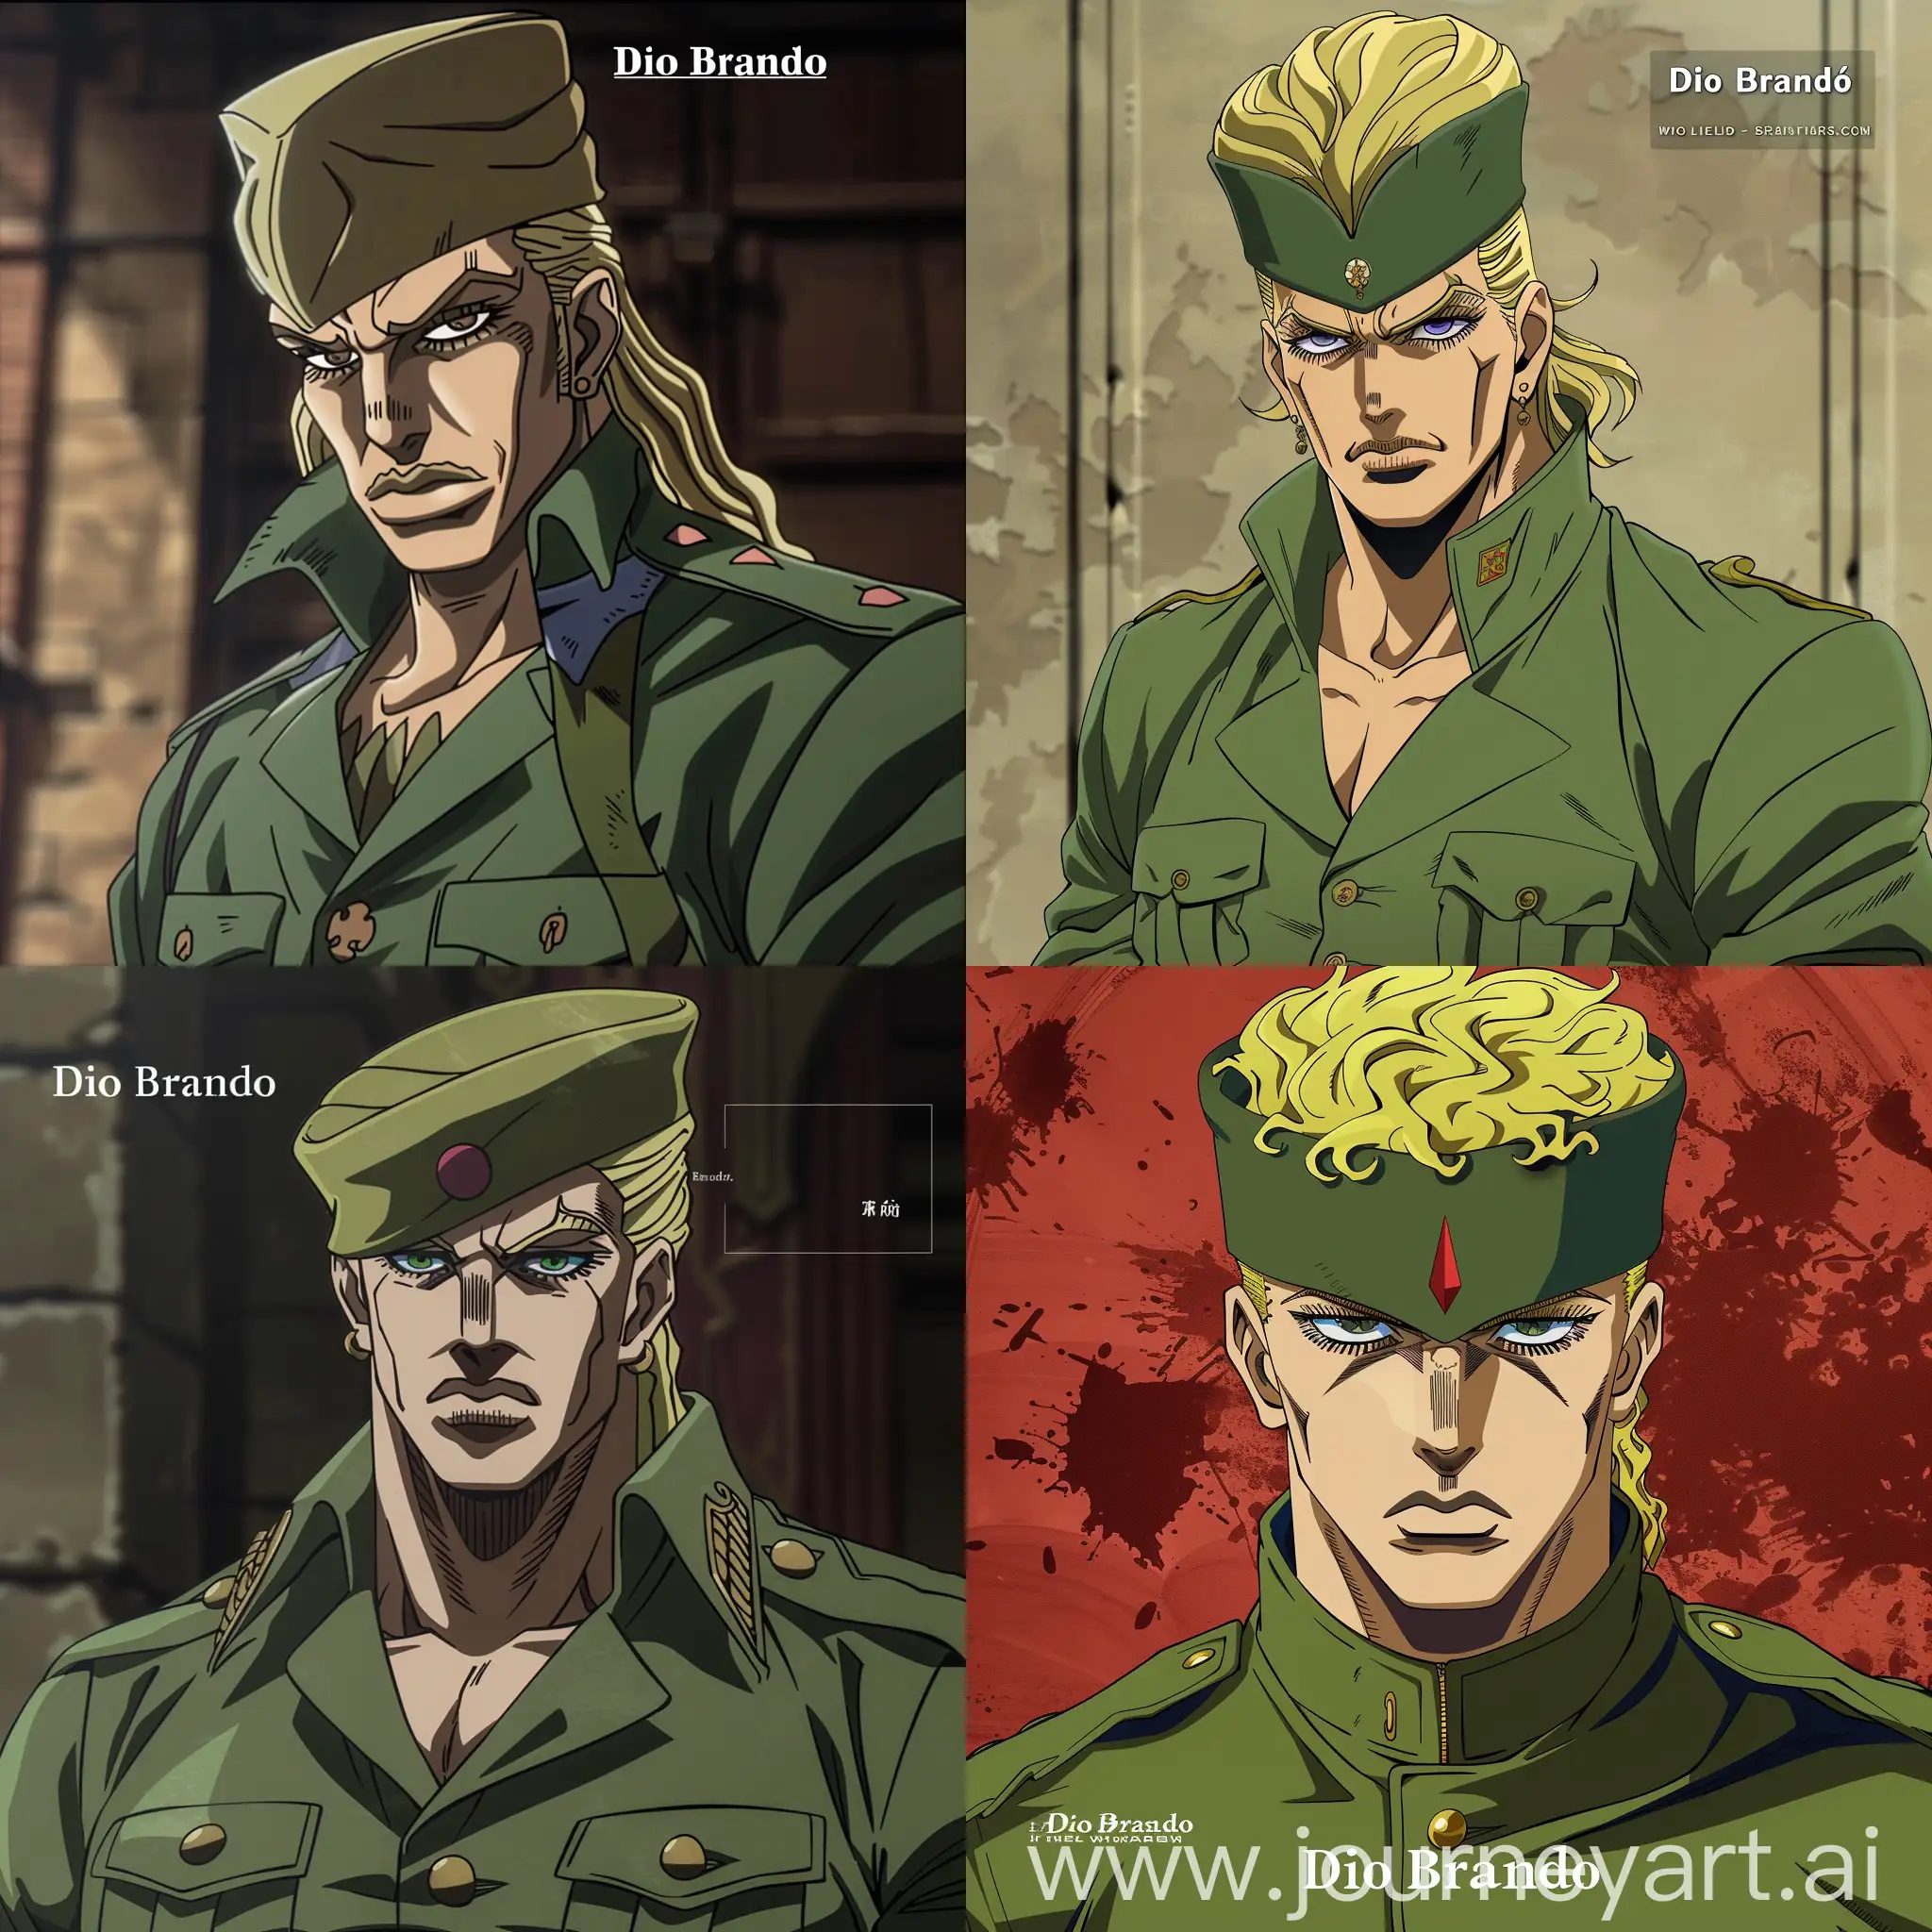 The character “Dio Brando” from the Jojo Bizarre Adventure anime looks like an Ottoman pasha from World War I and wears a fez. His hair is blond and he is a big muscular man. He has a sharp gaze and his jawline is very pointed and sharp. He wears a green military uniform. He has no beard or mustache. The fez he wears is a 20th century fez.